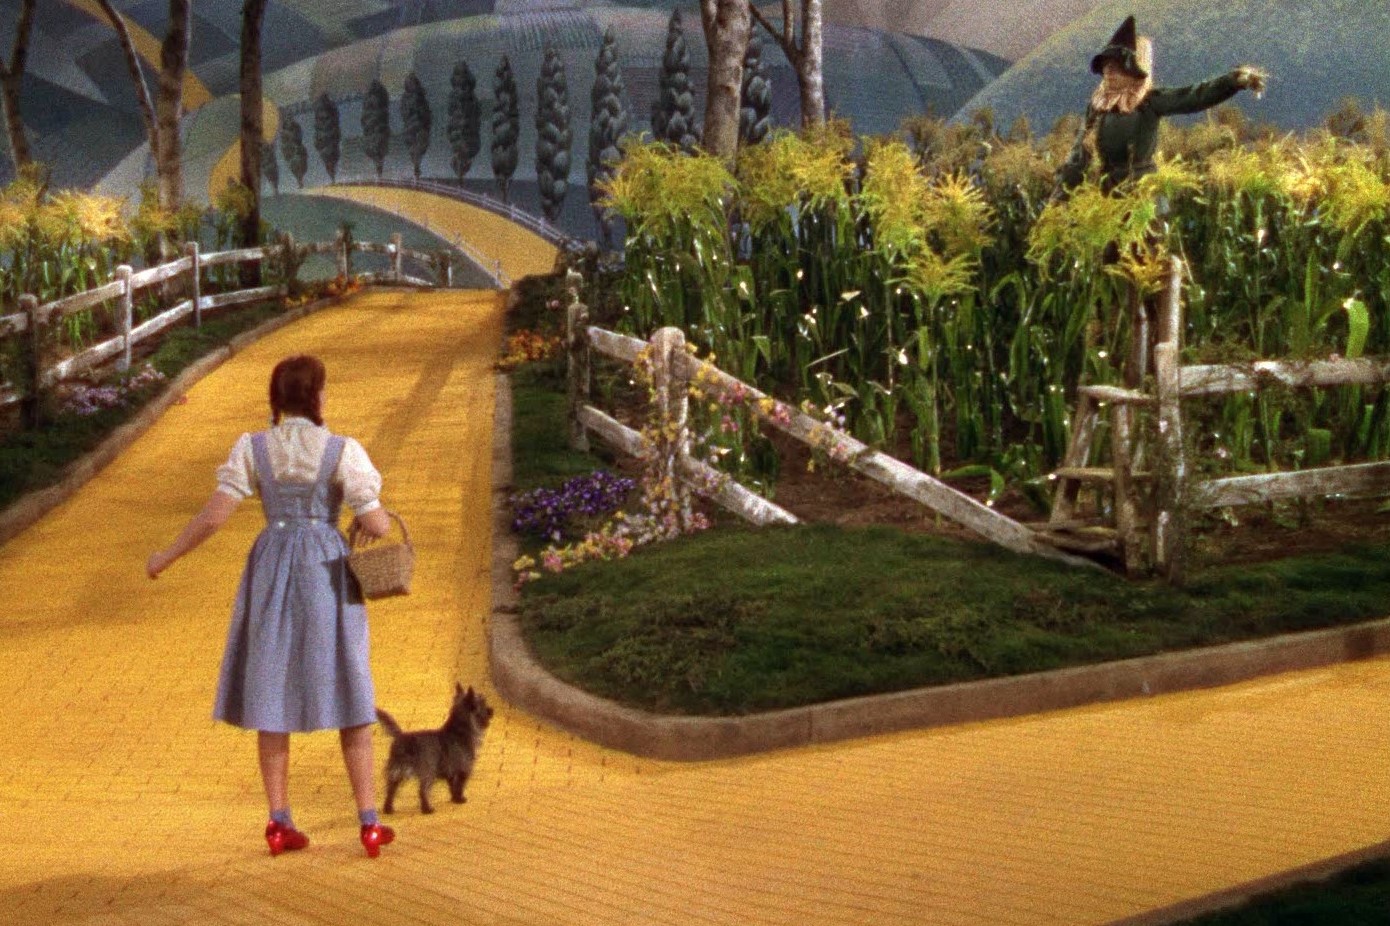 And If Dorothy Took The Wrong Turn On The Yellow Brick Road